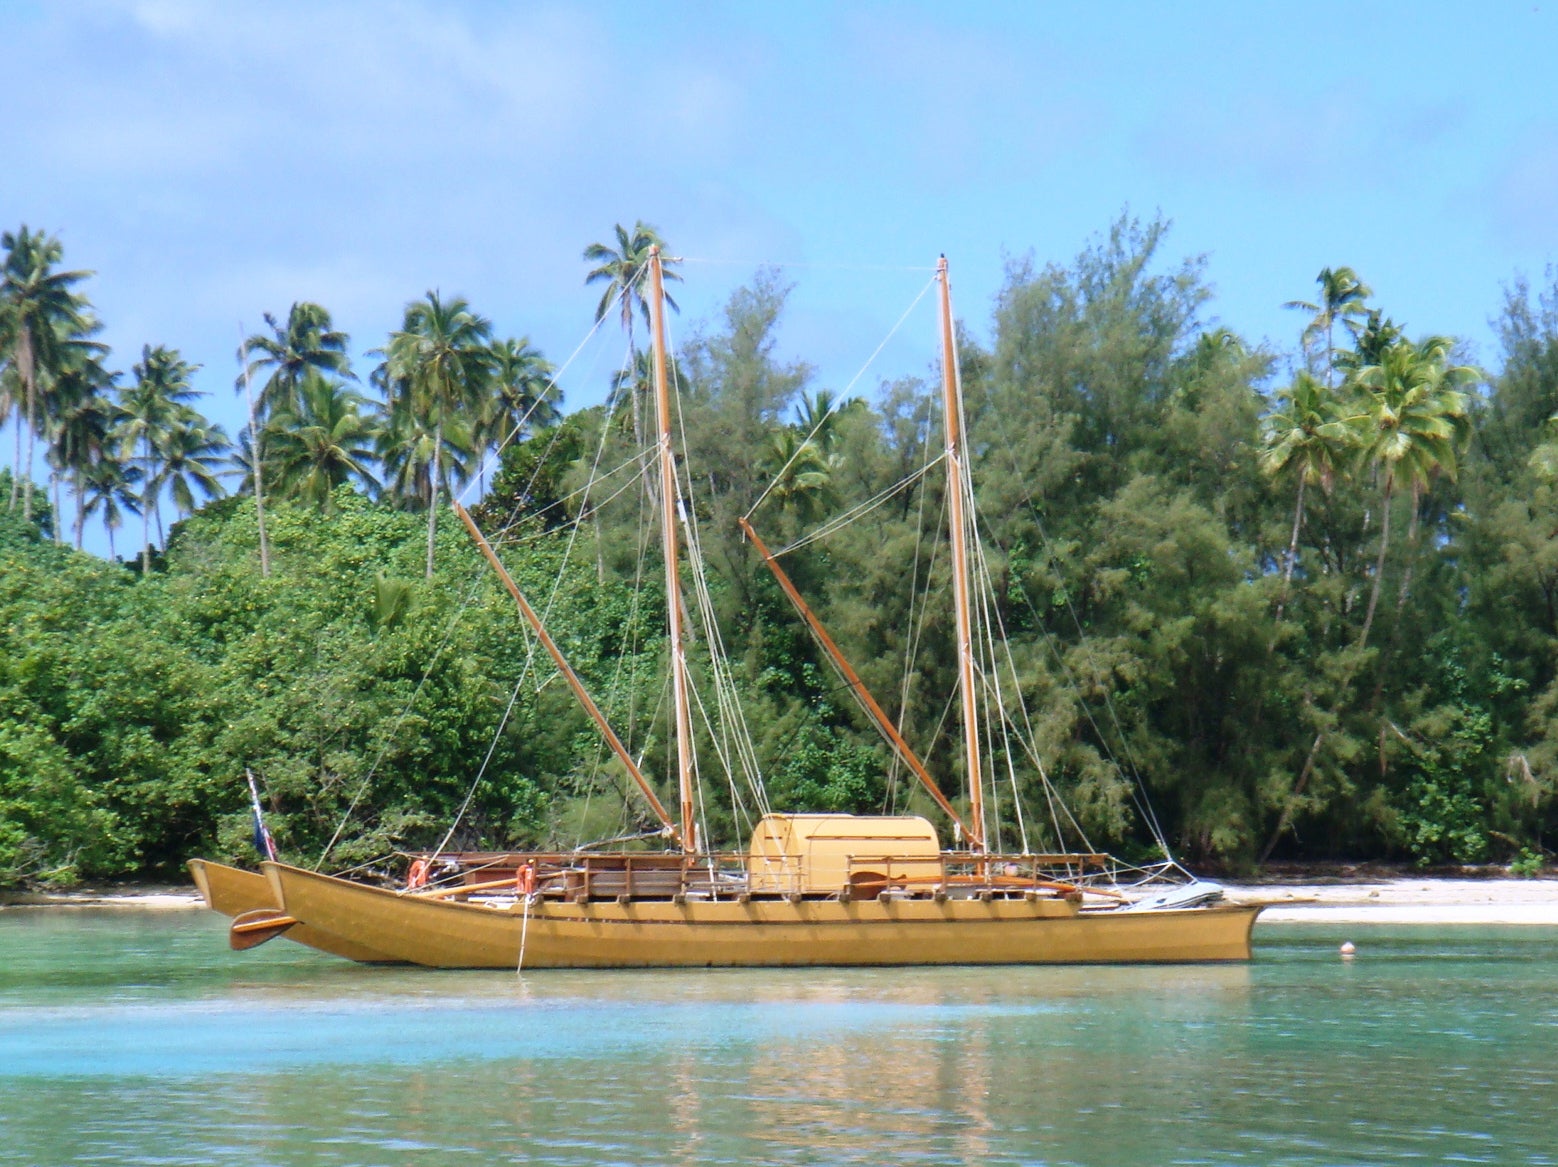 This modern reconstruction of a traditional Polynesian twin-hulled ocean-going vessel, shows the likely type of craft which Polynesians probably used to sail 1,700 miles to Easter Island in around 1200 AD